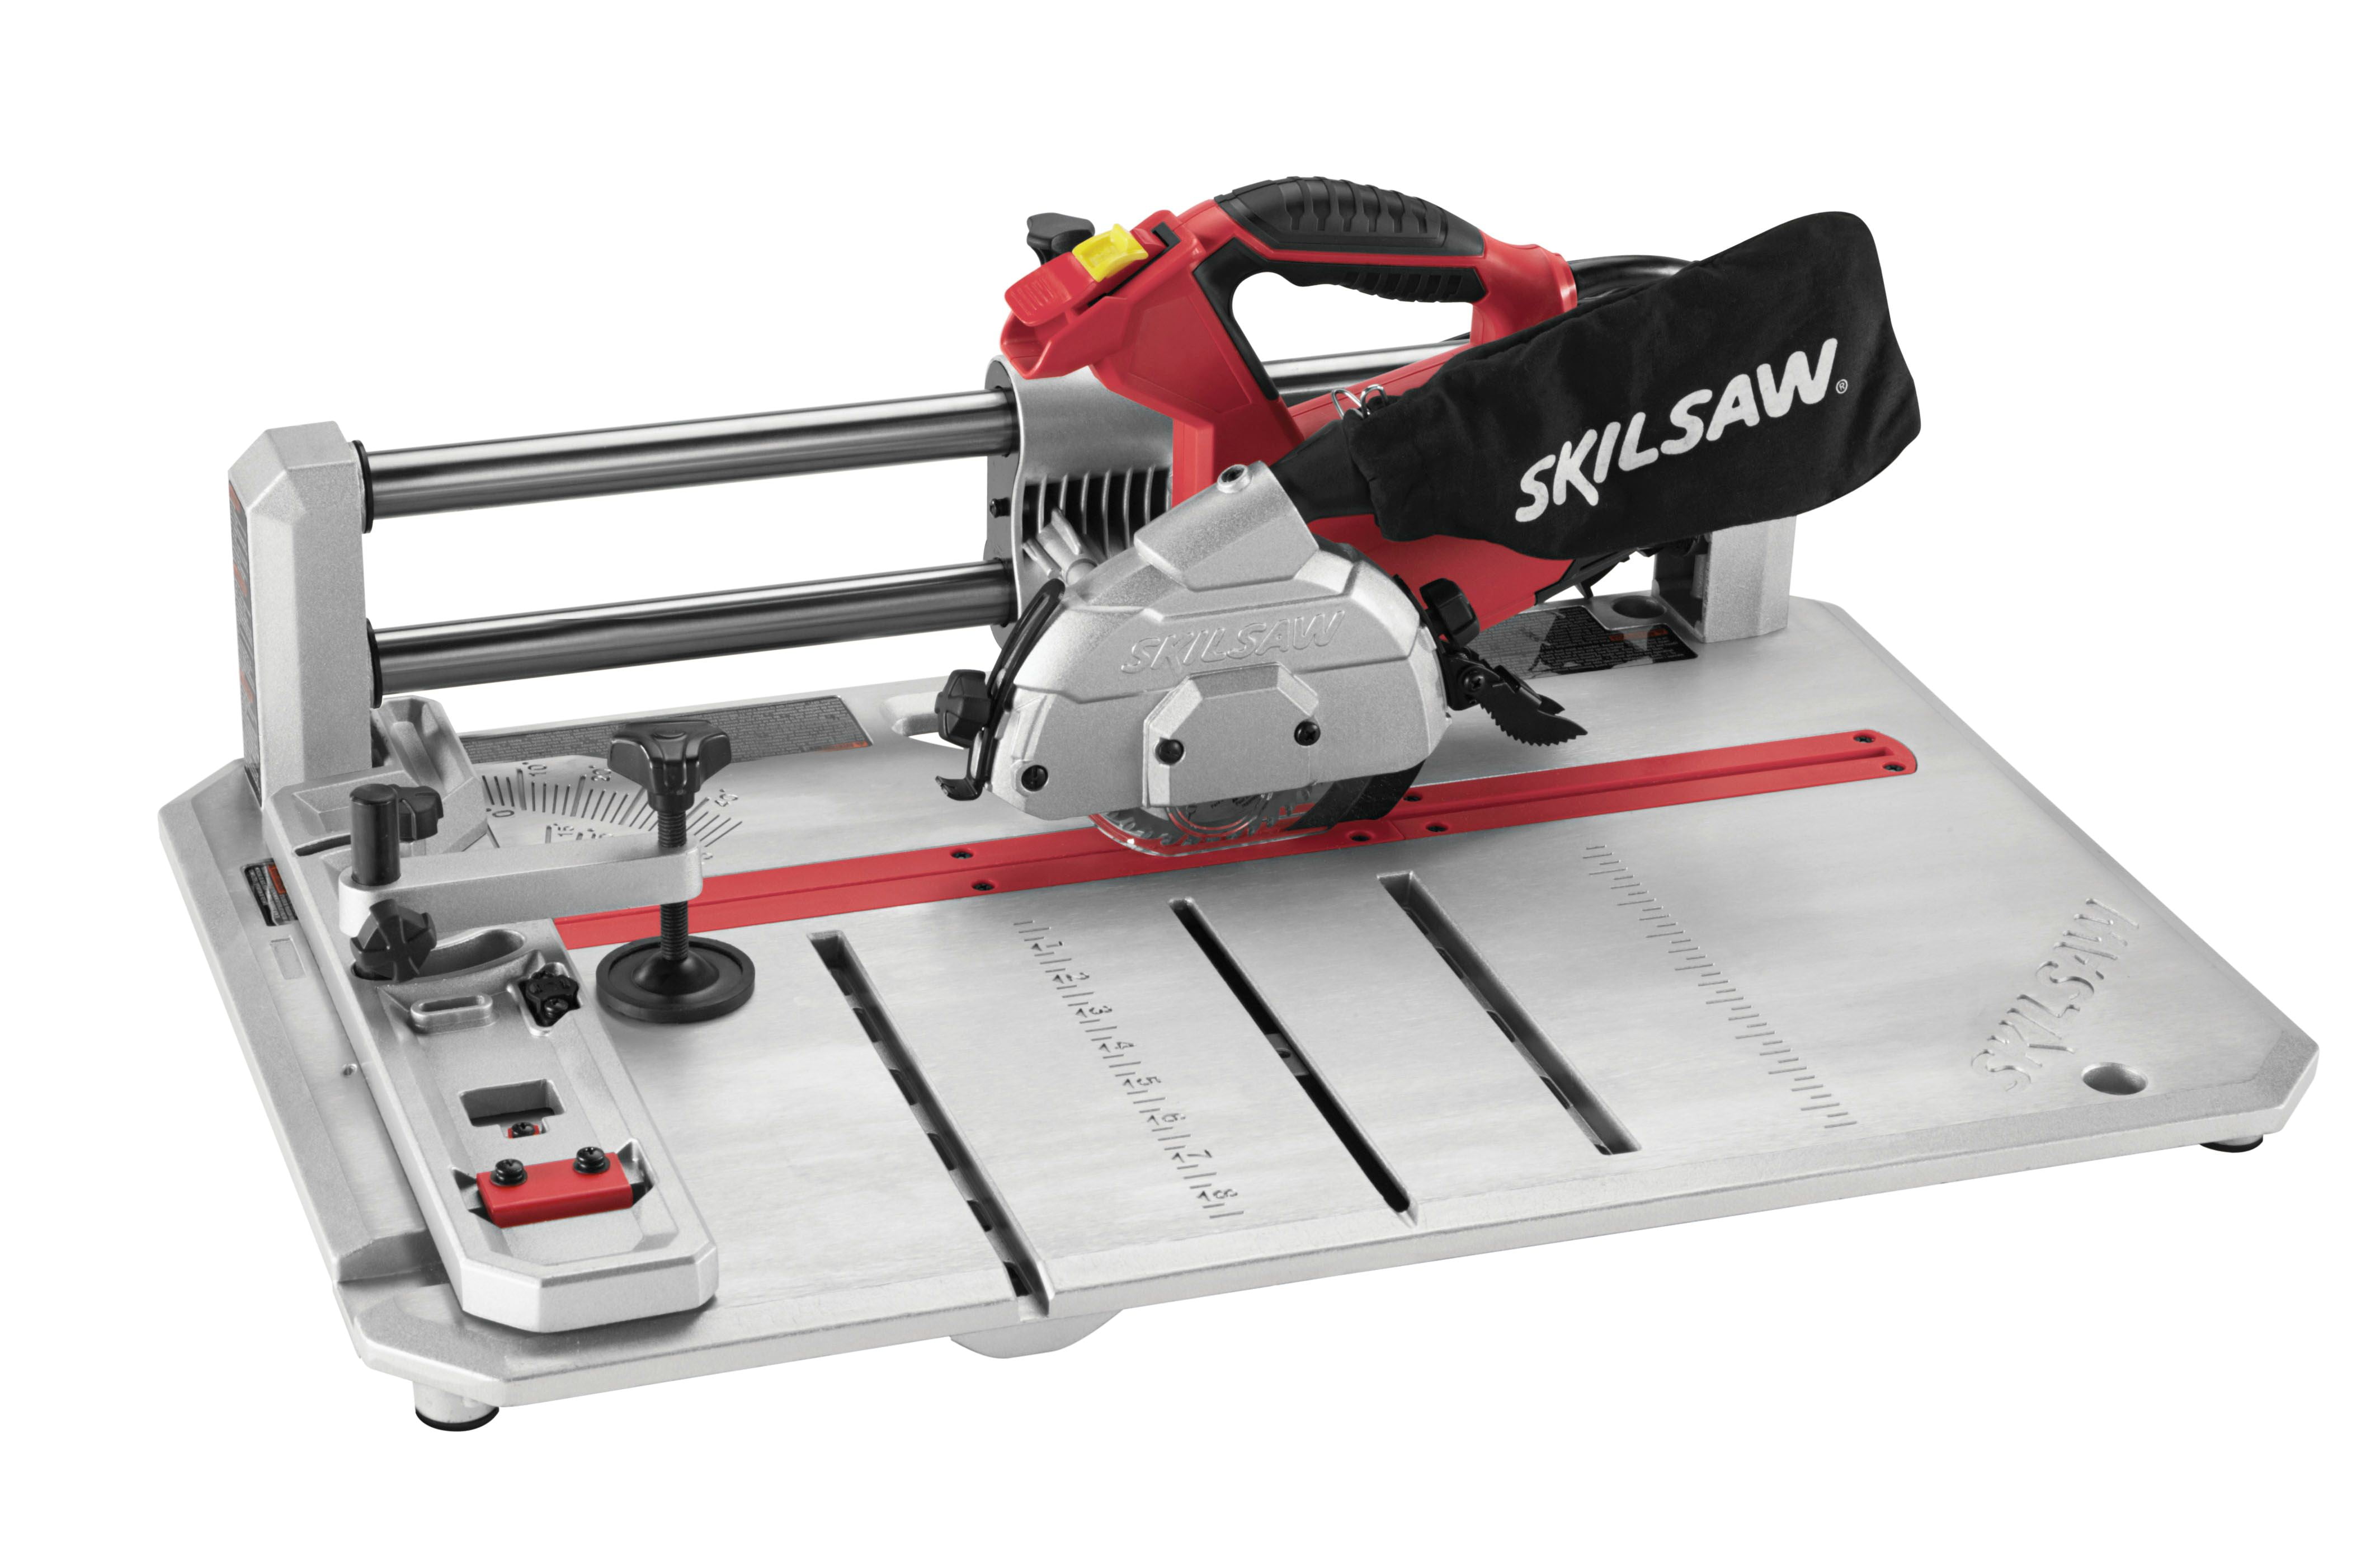 SKIL 7-Amp Flooring Saw with 36T Contractor Blade, 3601-02